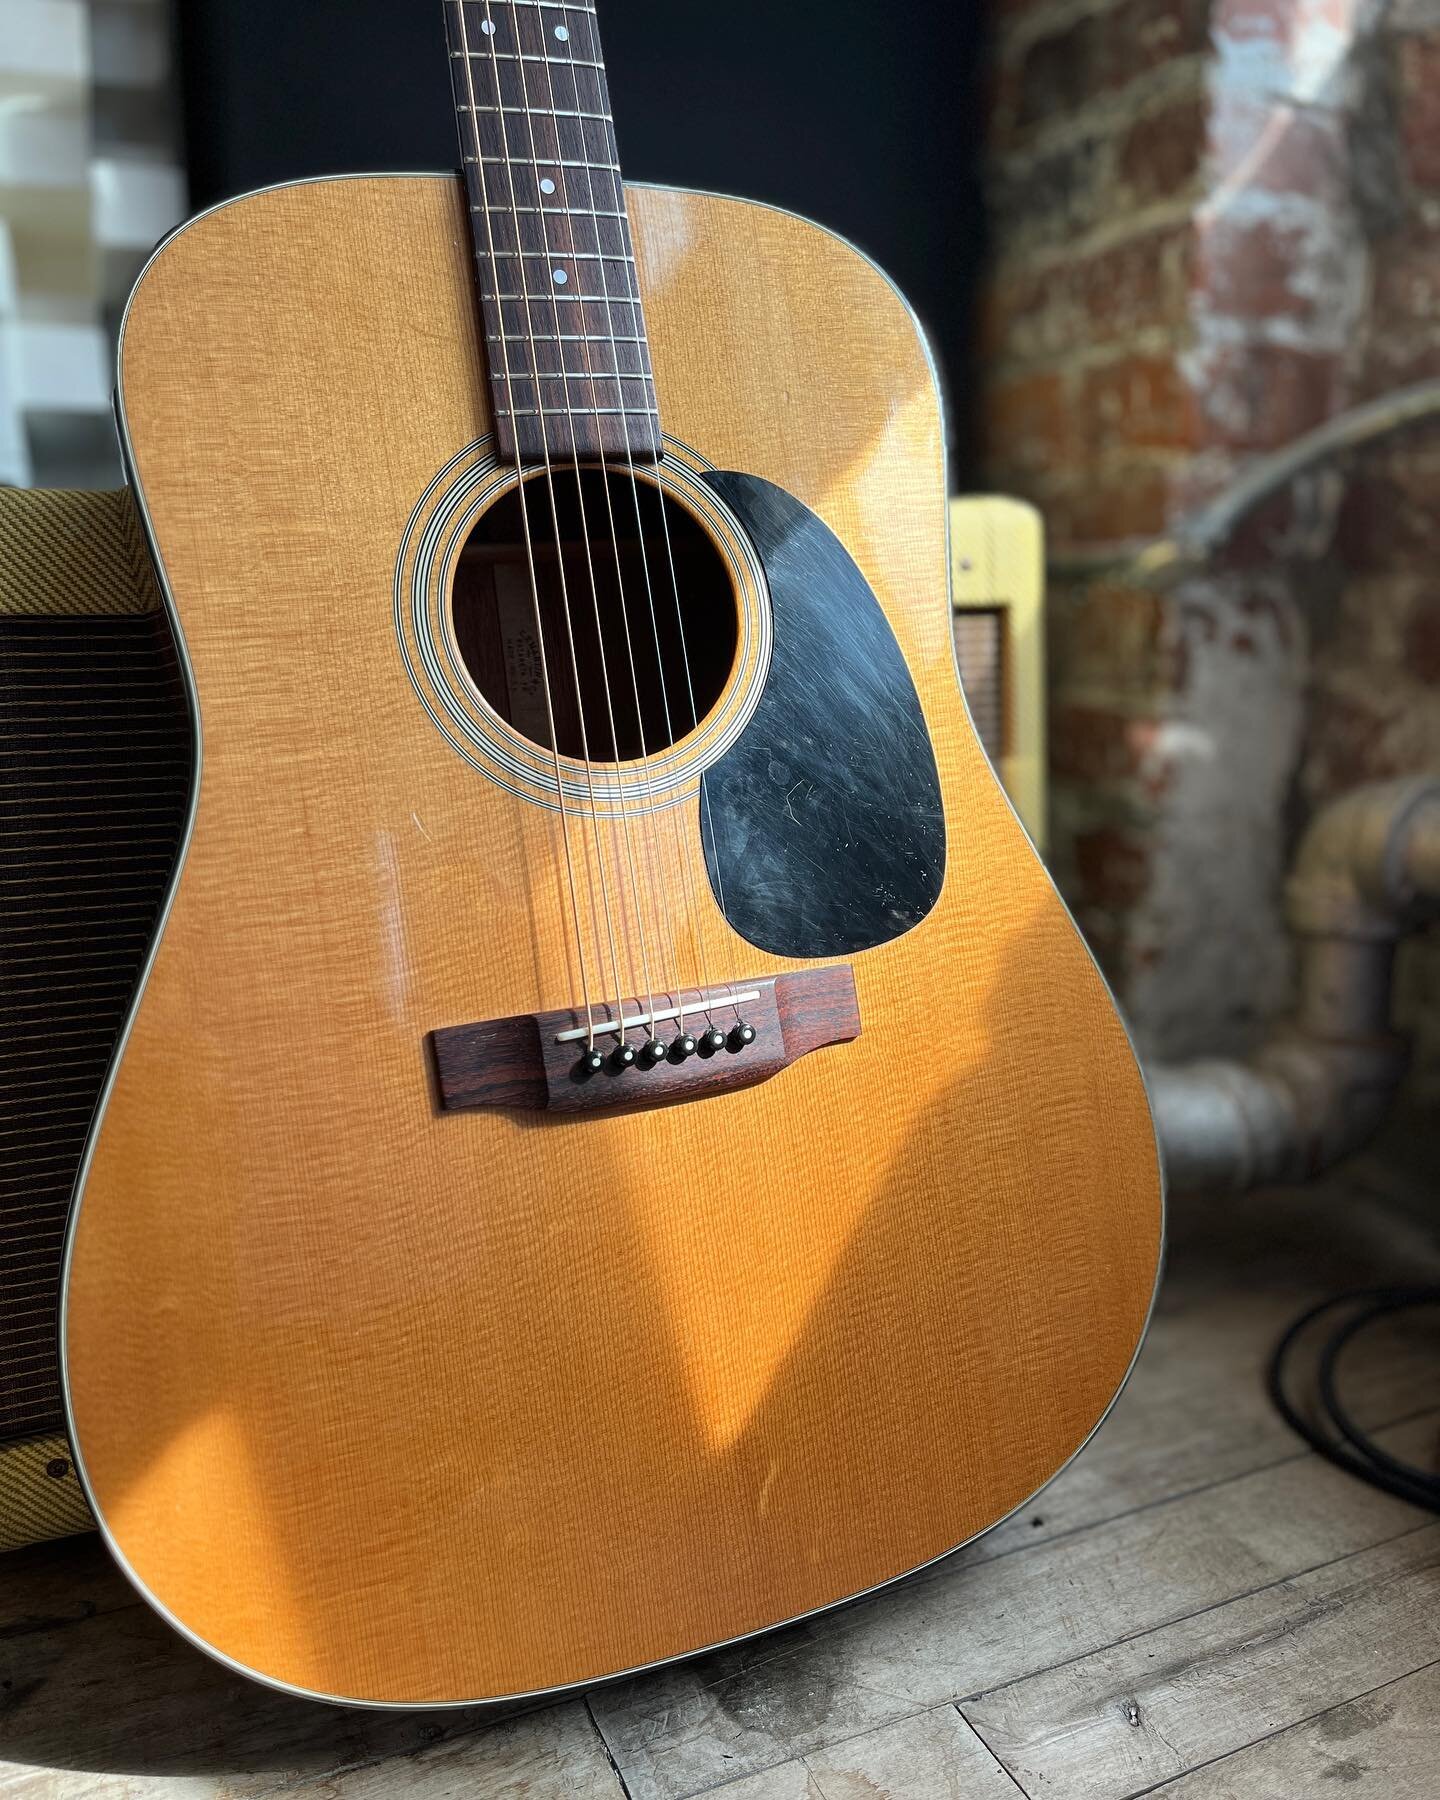 Is it just me or does everyone stick their nose in the sound hole before playing a nice acoustic to smell the wood? #martind18 #martind28 #martinguitar #richmohoganyandleatherboundbooks #acousticguitar #neilyoung #recordingstudio #vintageguitar #reco